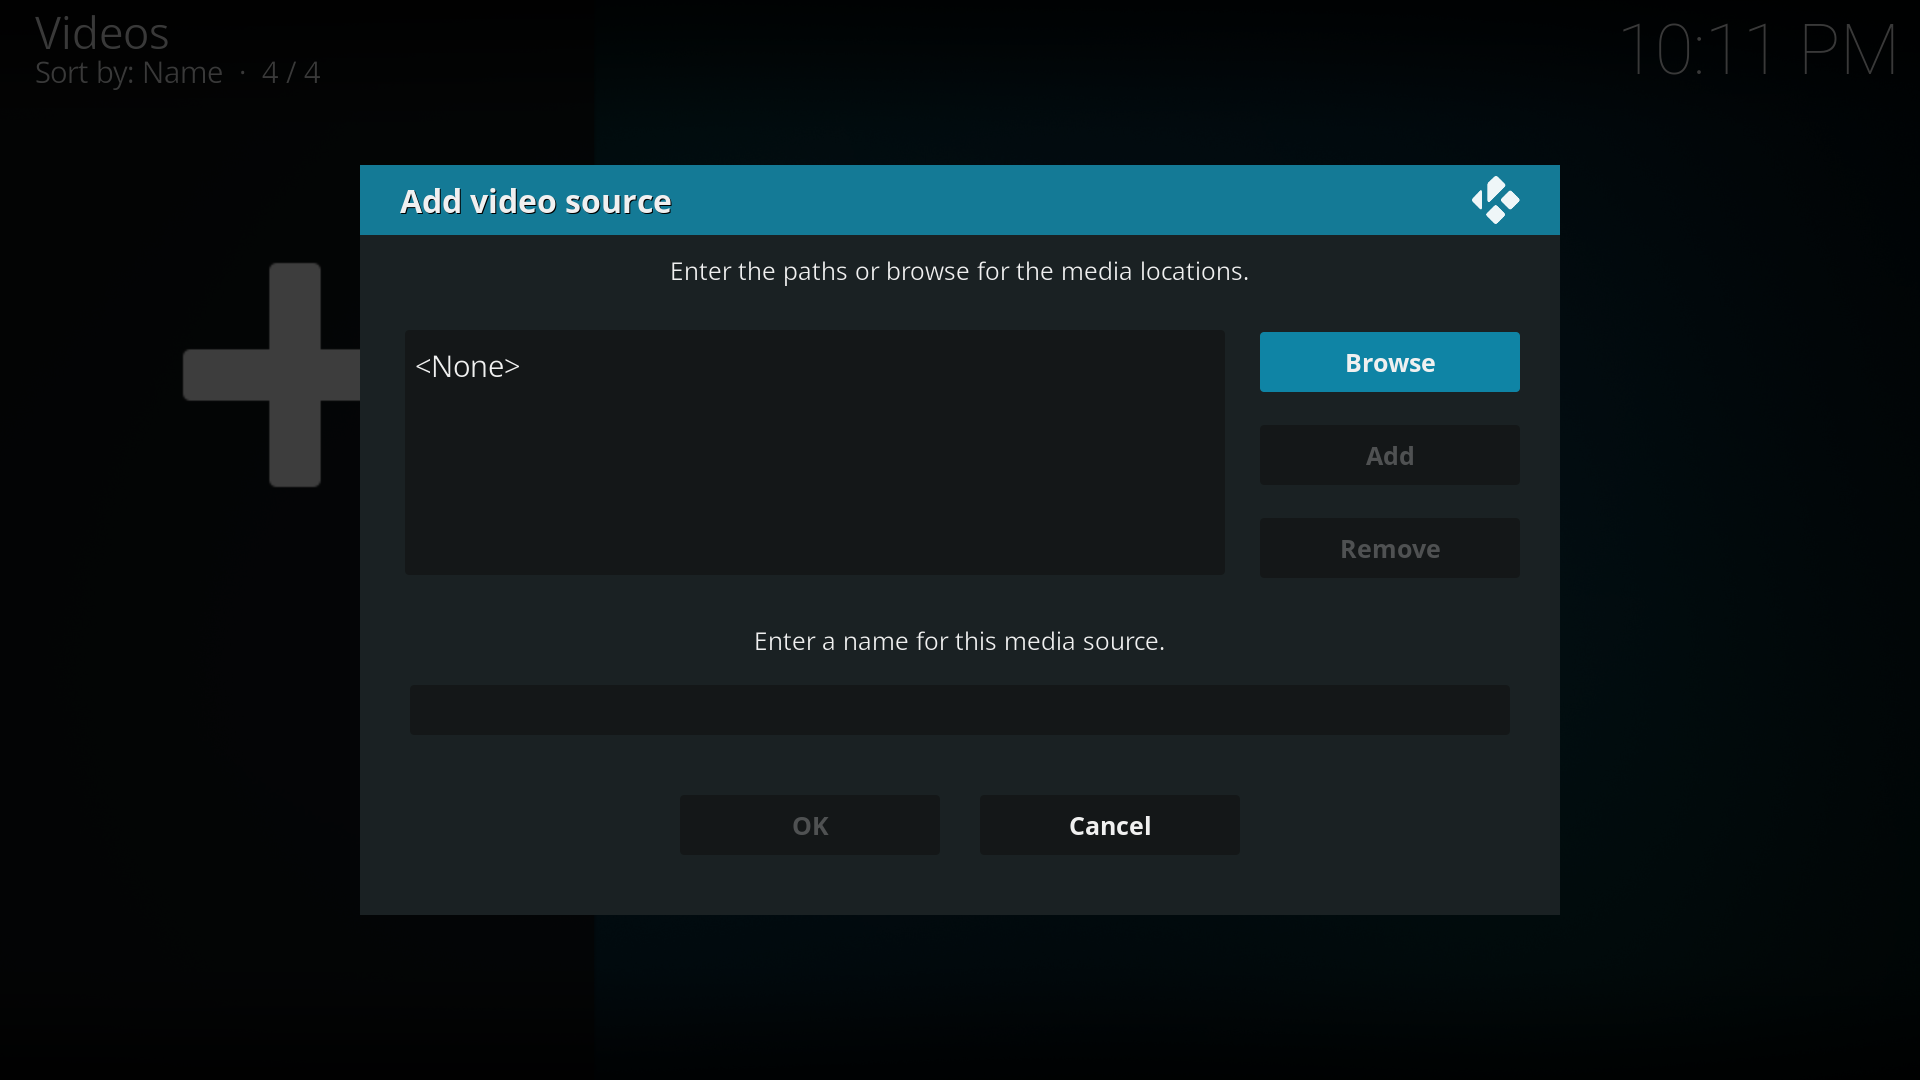 Step 4: Select the BROWSE button from the ADD VIDEO SOURCE window.